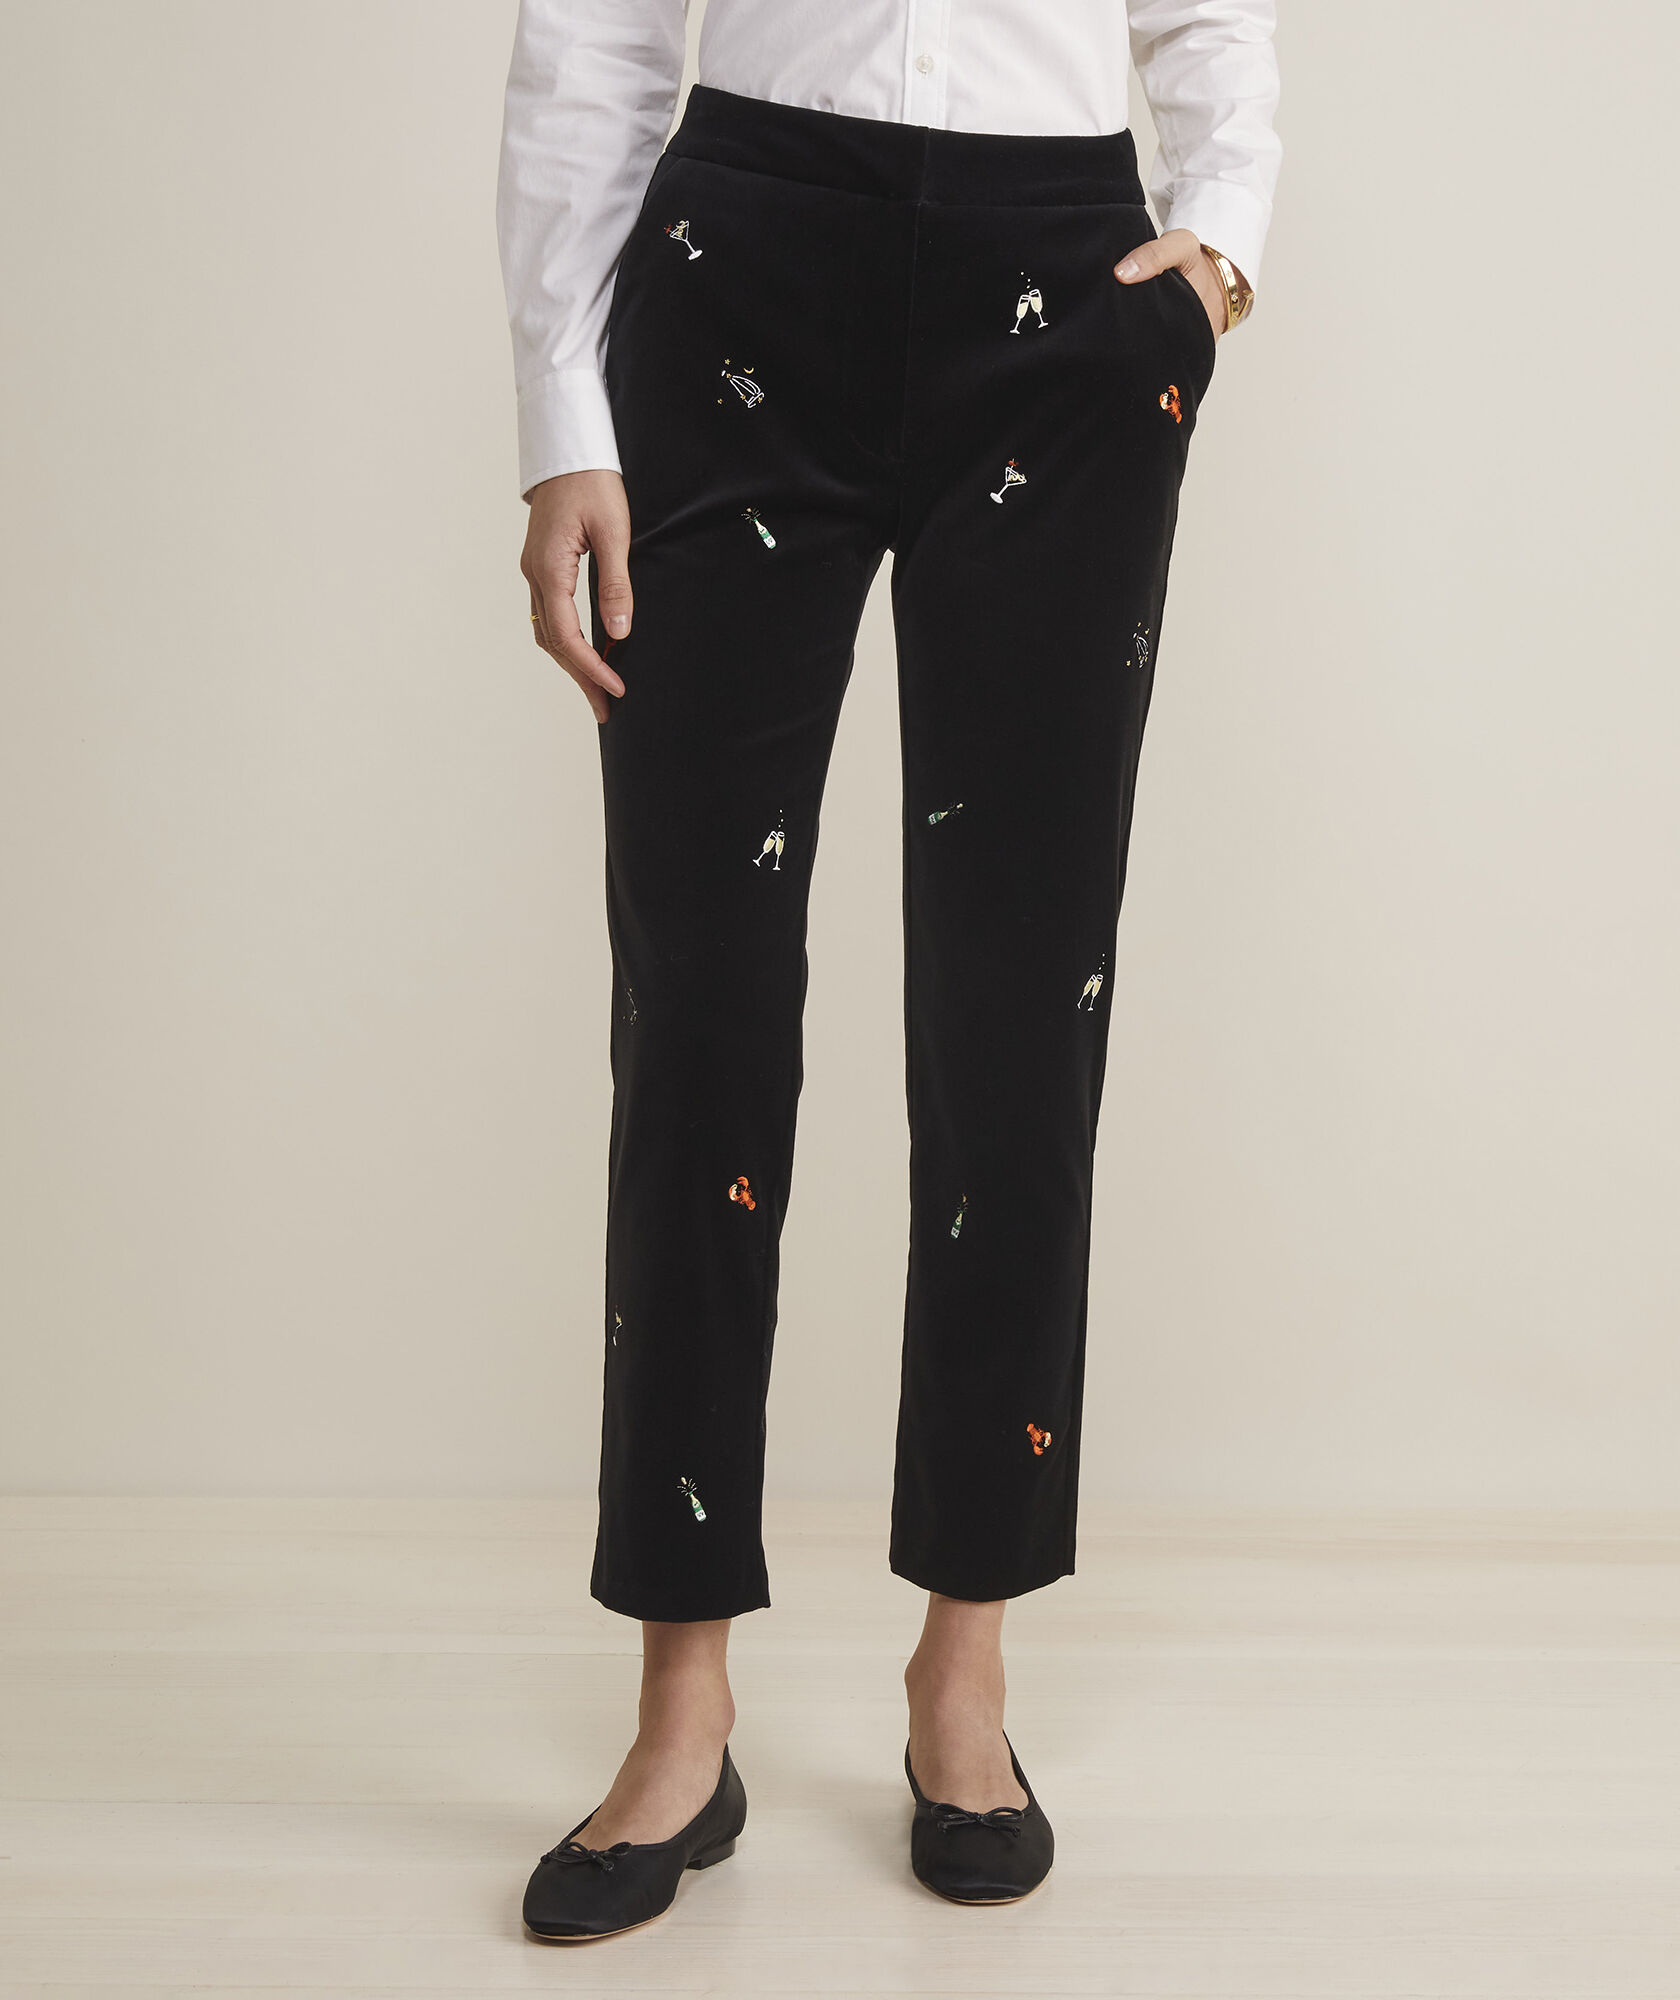 Maywine Embroidered Pants - Coldwater Creek